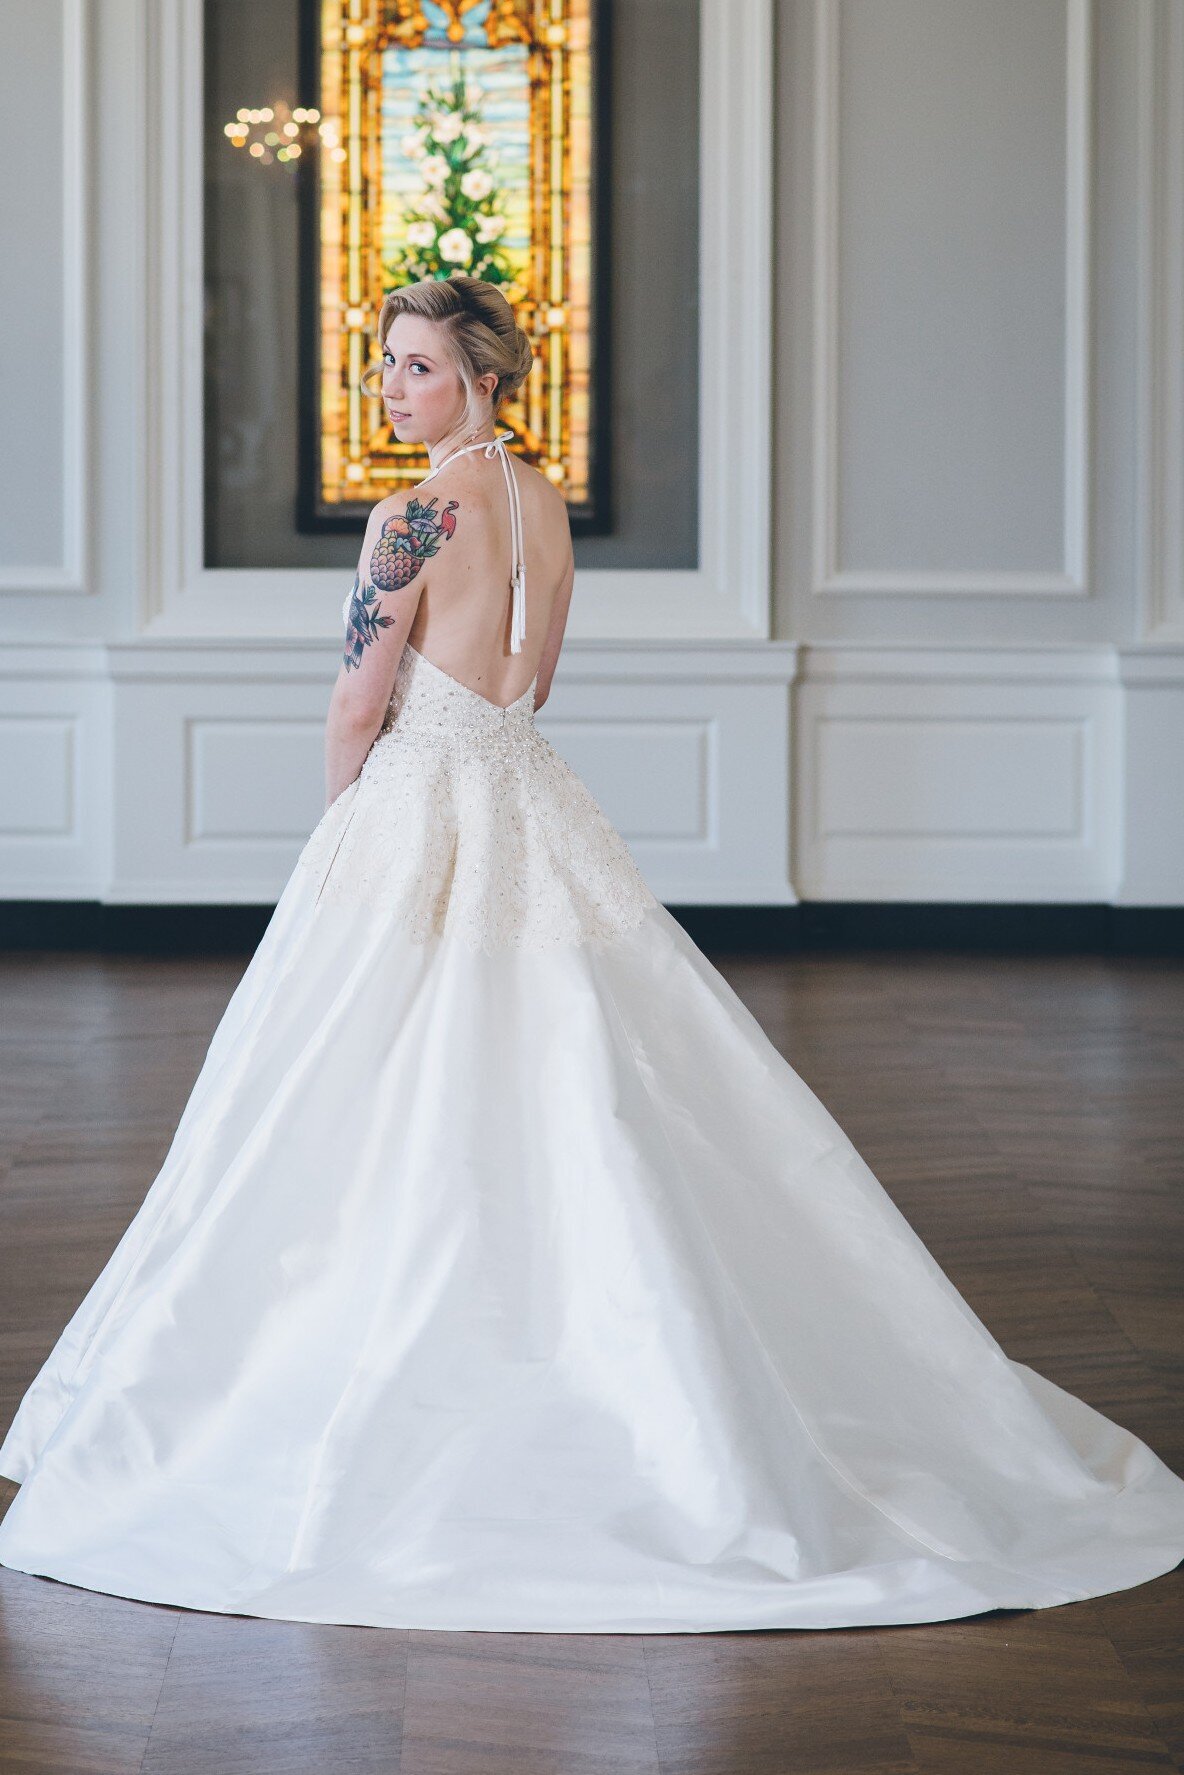 The full ballgown skirt and lace bodice make the Karli wedding dress style a modern and timeless bridal look.